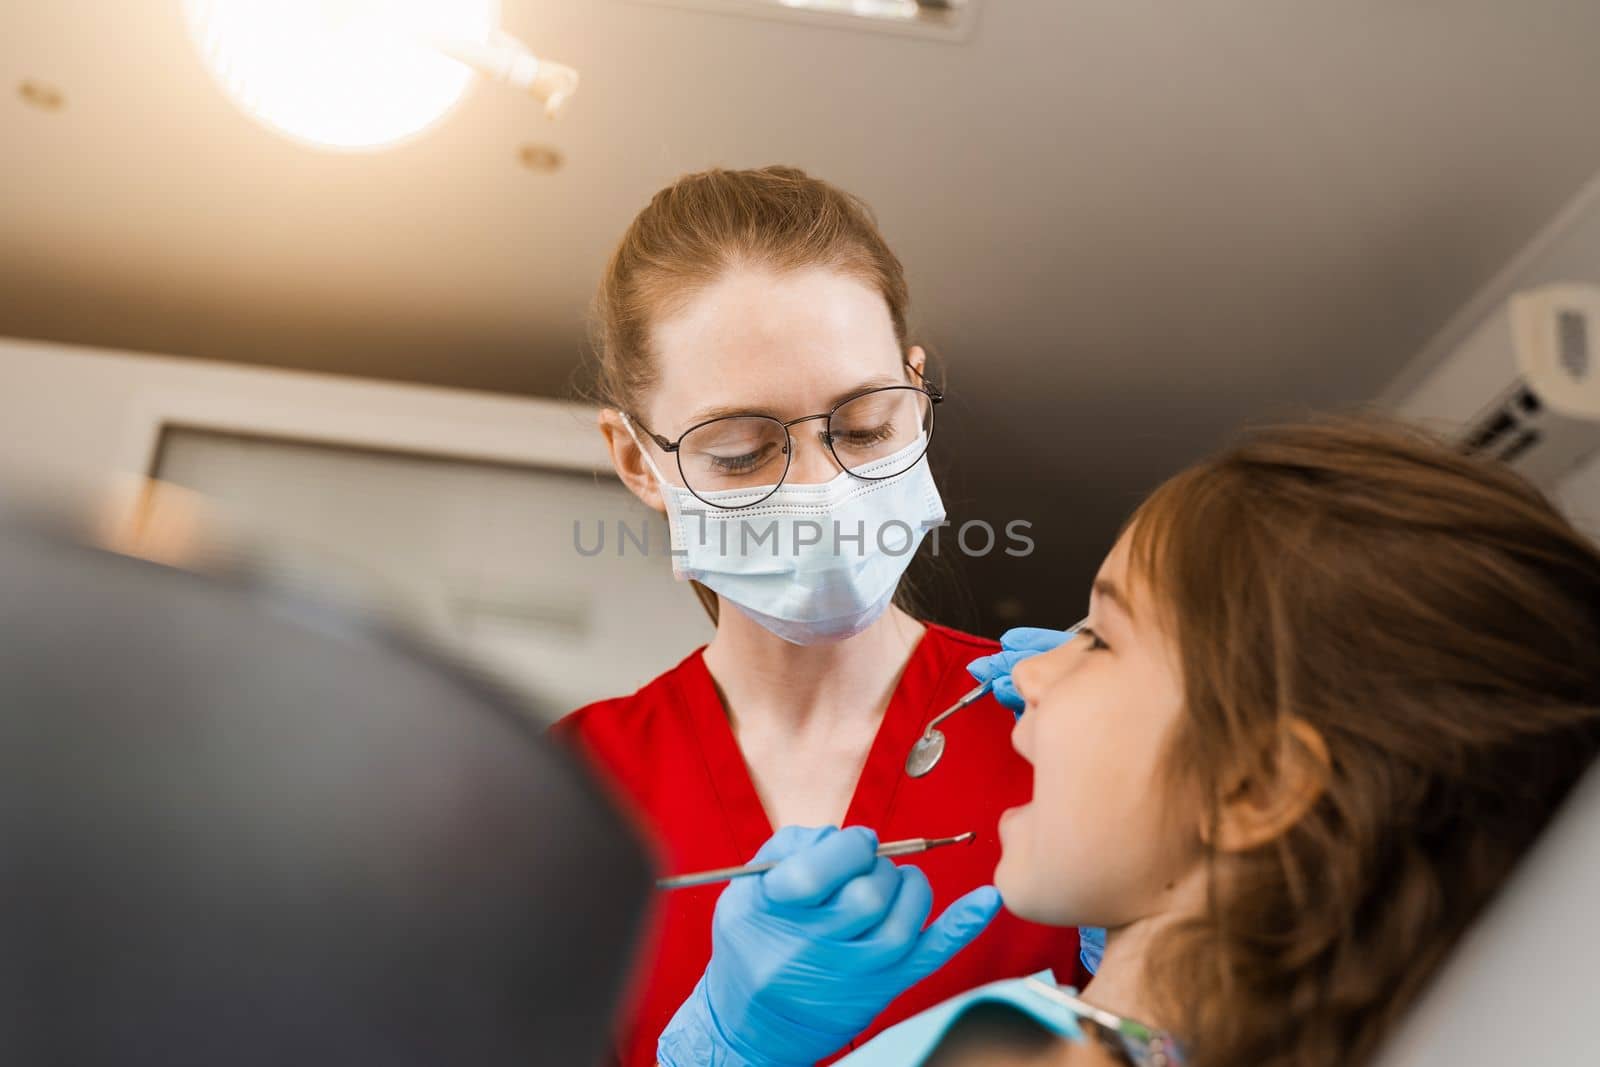 Pediatric dentist and cheerful girl child smiling in dentistry. The child smiles at the consultation with the dentist